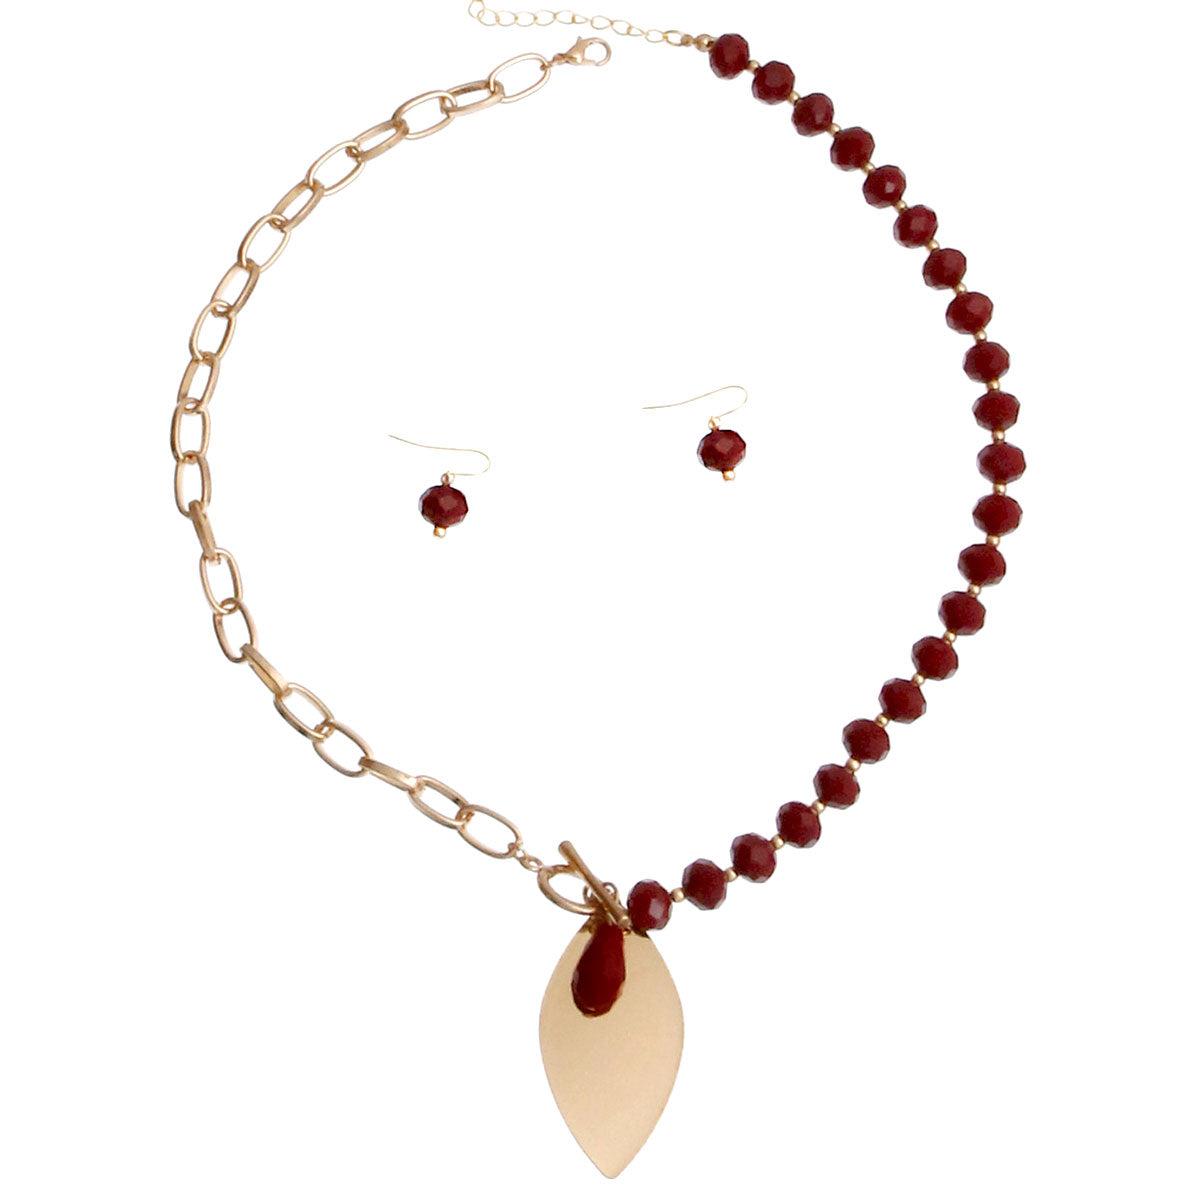 Burgundy Bead Toggle Necklace